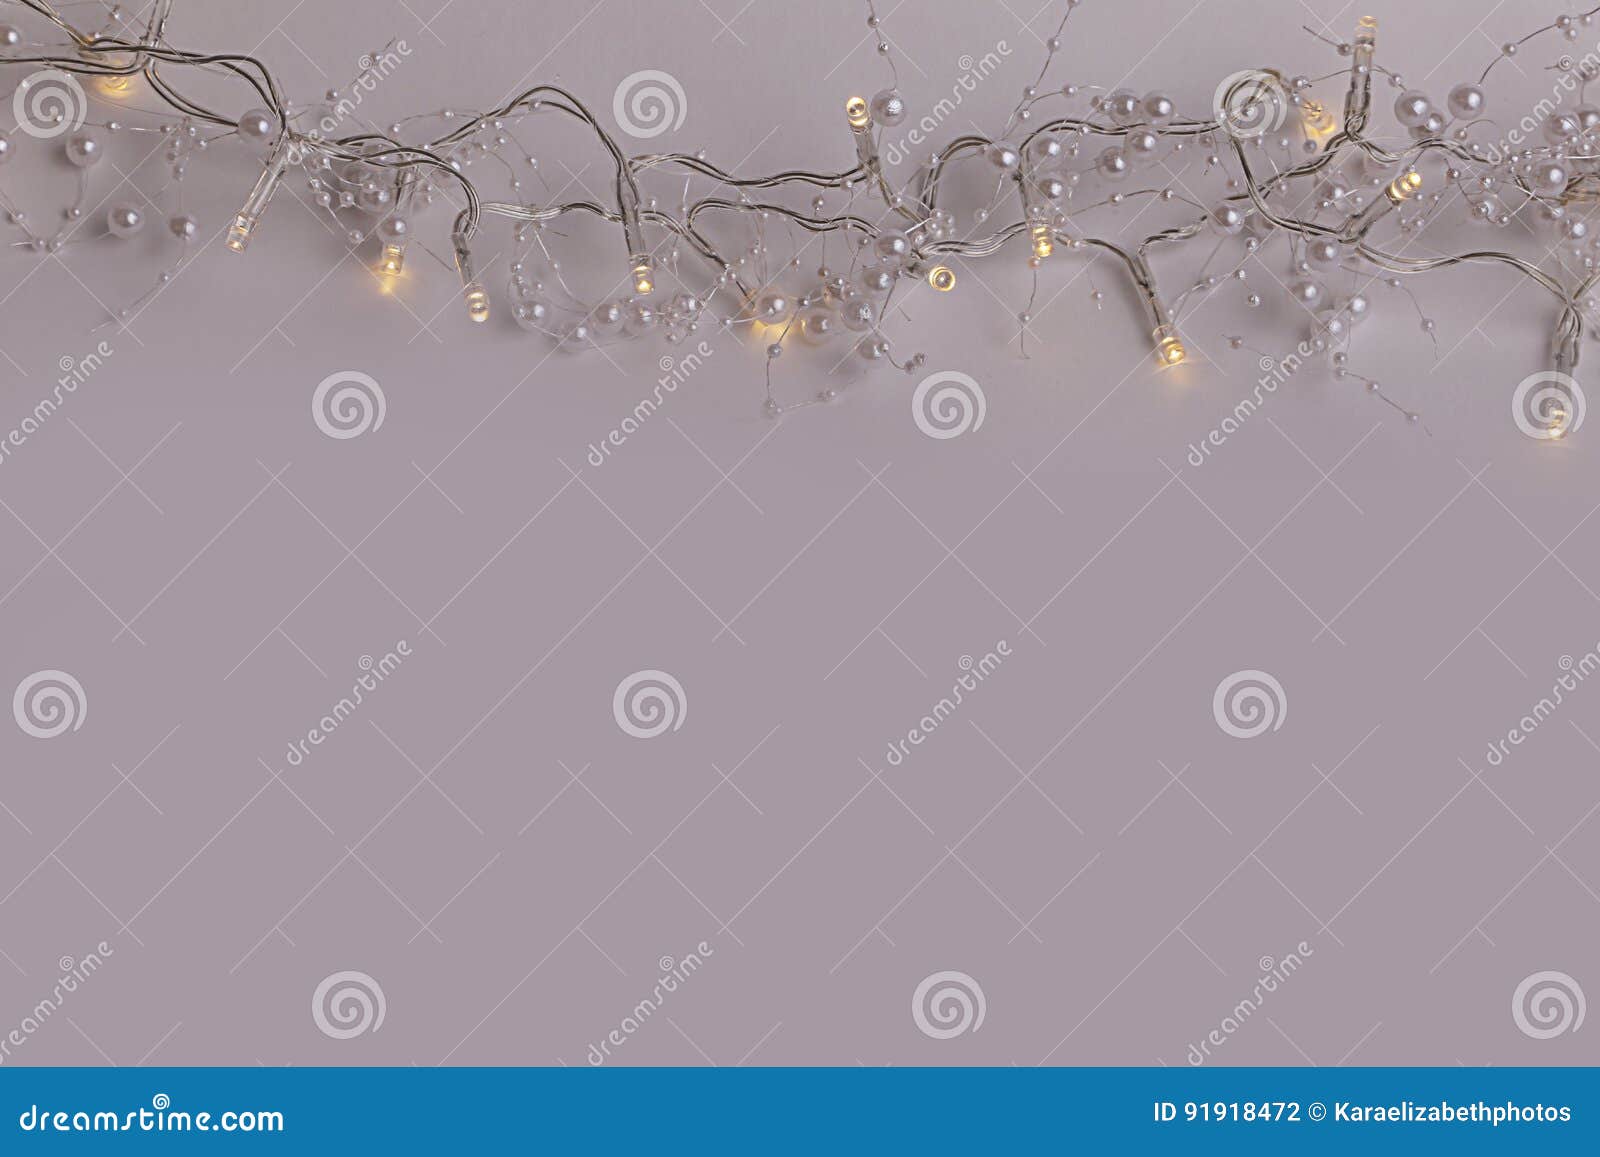 beautiful wedding or christmas fairly lights with pearls